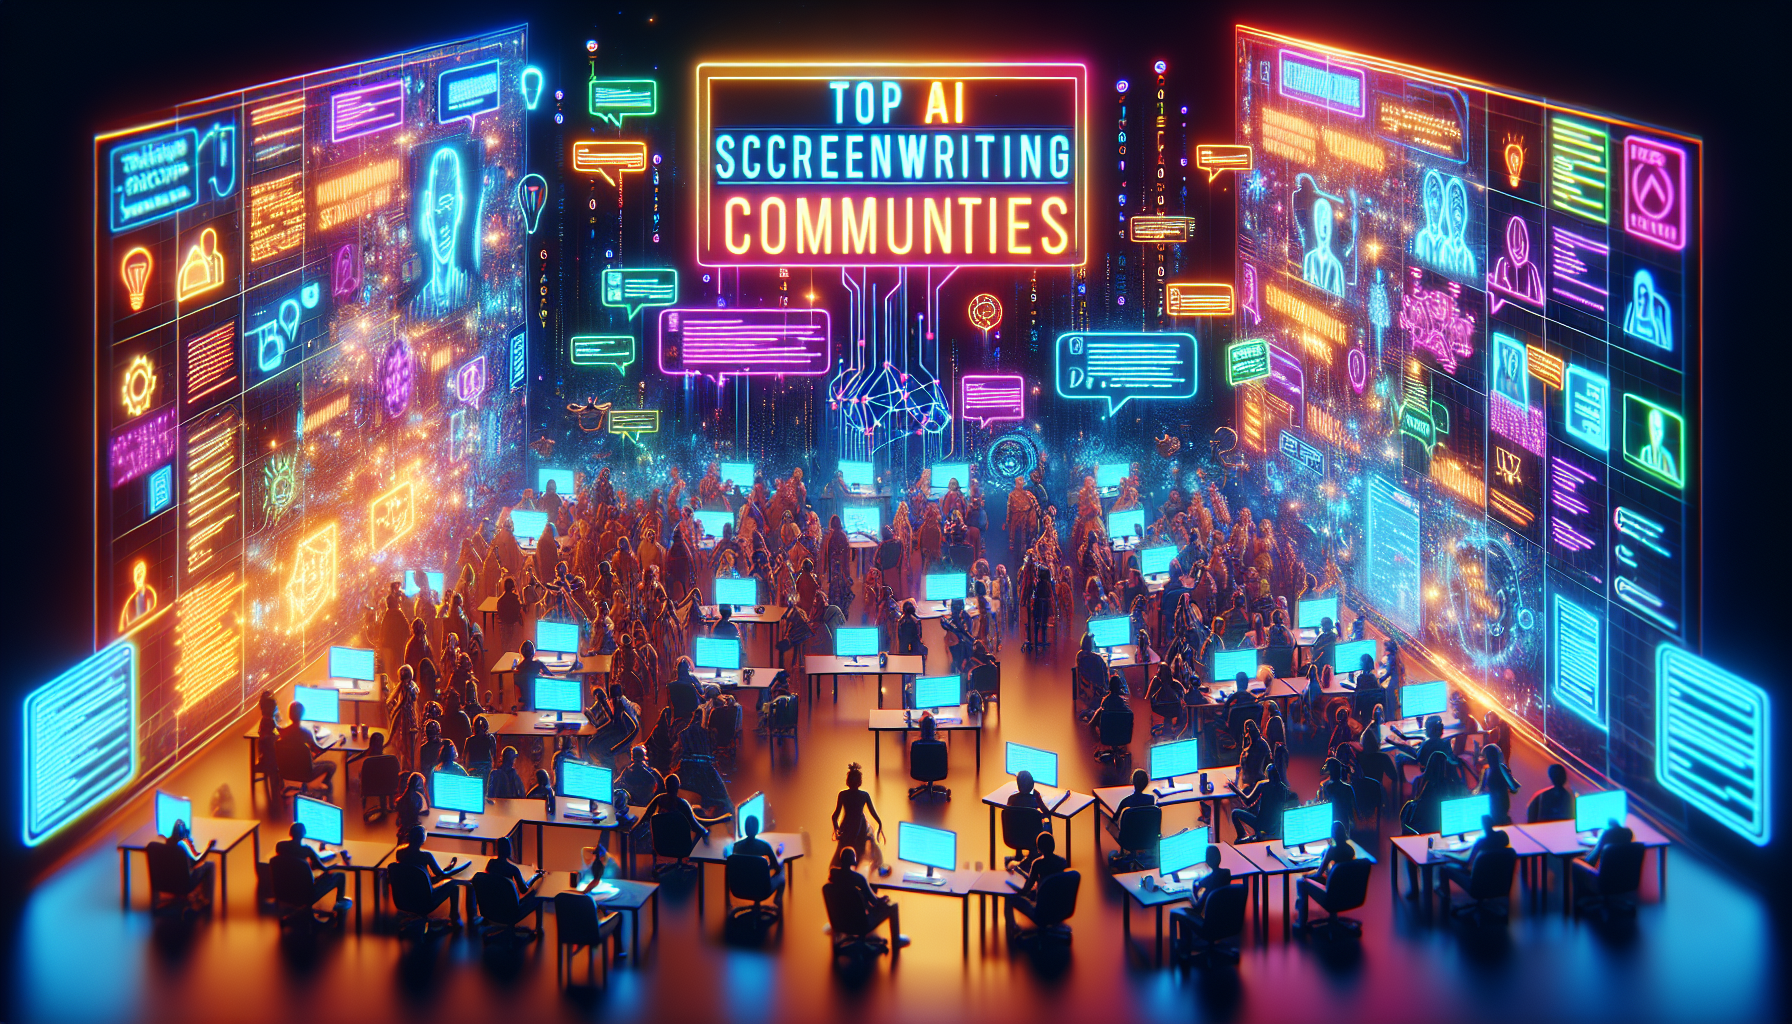 Create a digital artwork of a vibrant, futuristic online forum bustling with activity. Show diverse virtual avatars representing screenwriters, each from different cultural backgrounds, engaged in ani